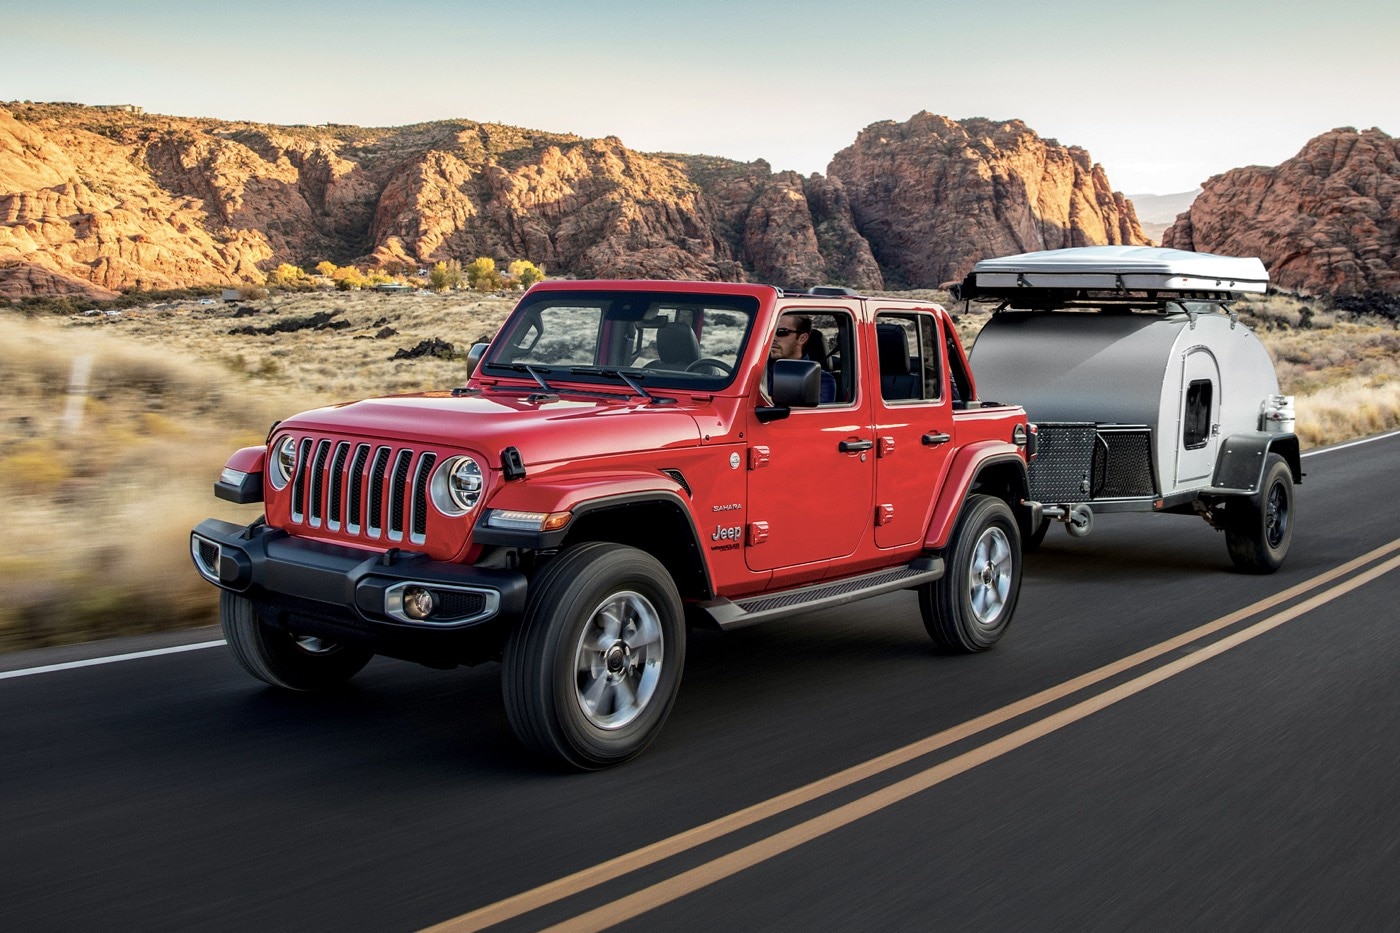 A red 2022 Jeep Wrangler Unlimited Sahara towing a small motorhome on a desert road